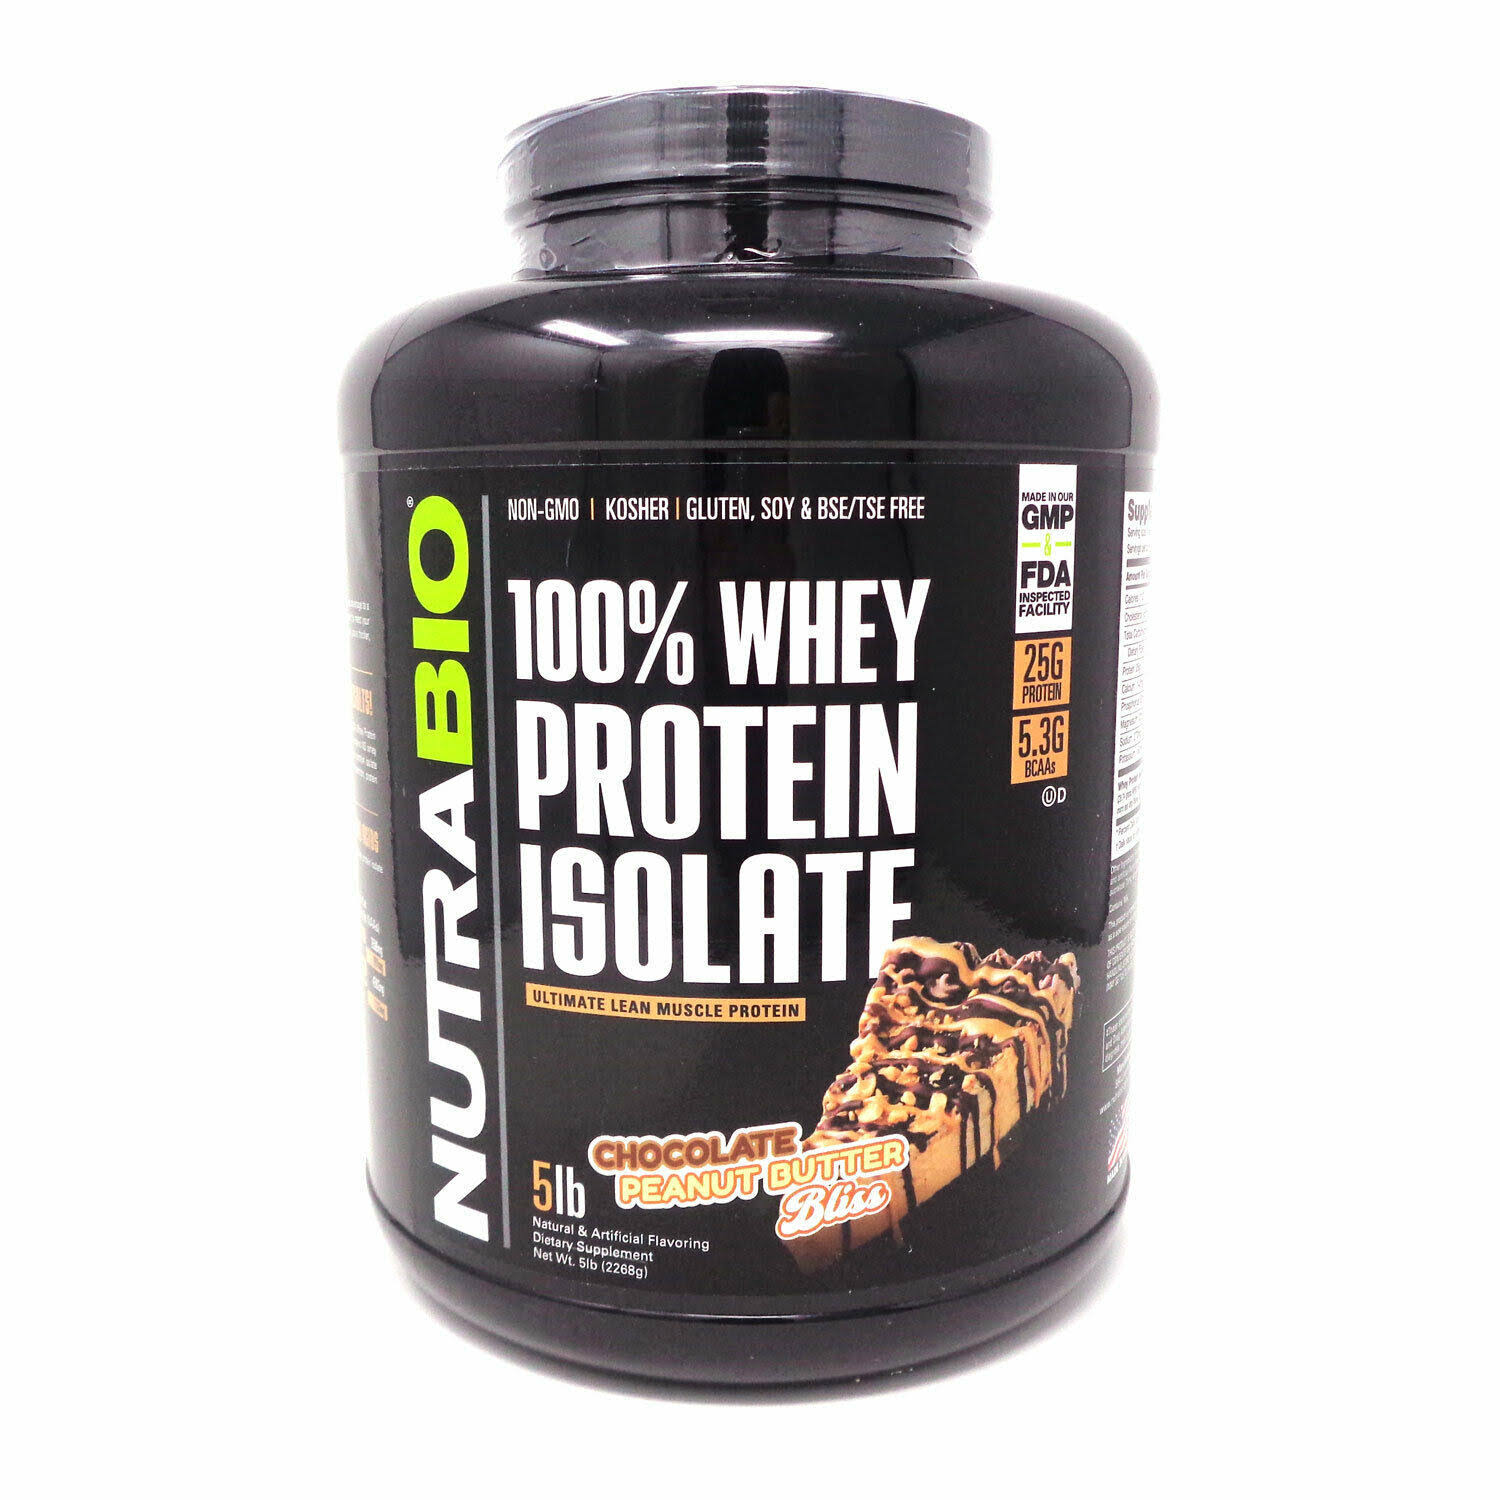 NutraBio - 100% Whey Protein Isolate 5 lbs / Chocolate Peanut Butter Bliss